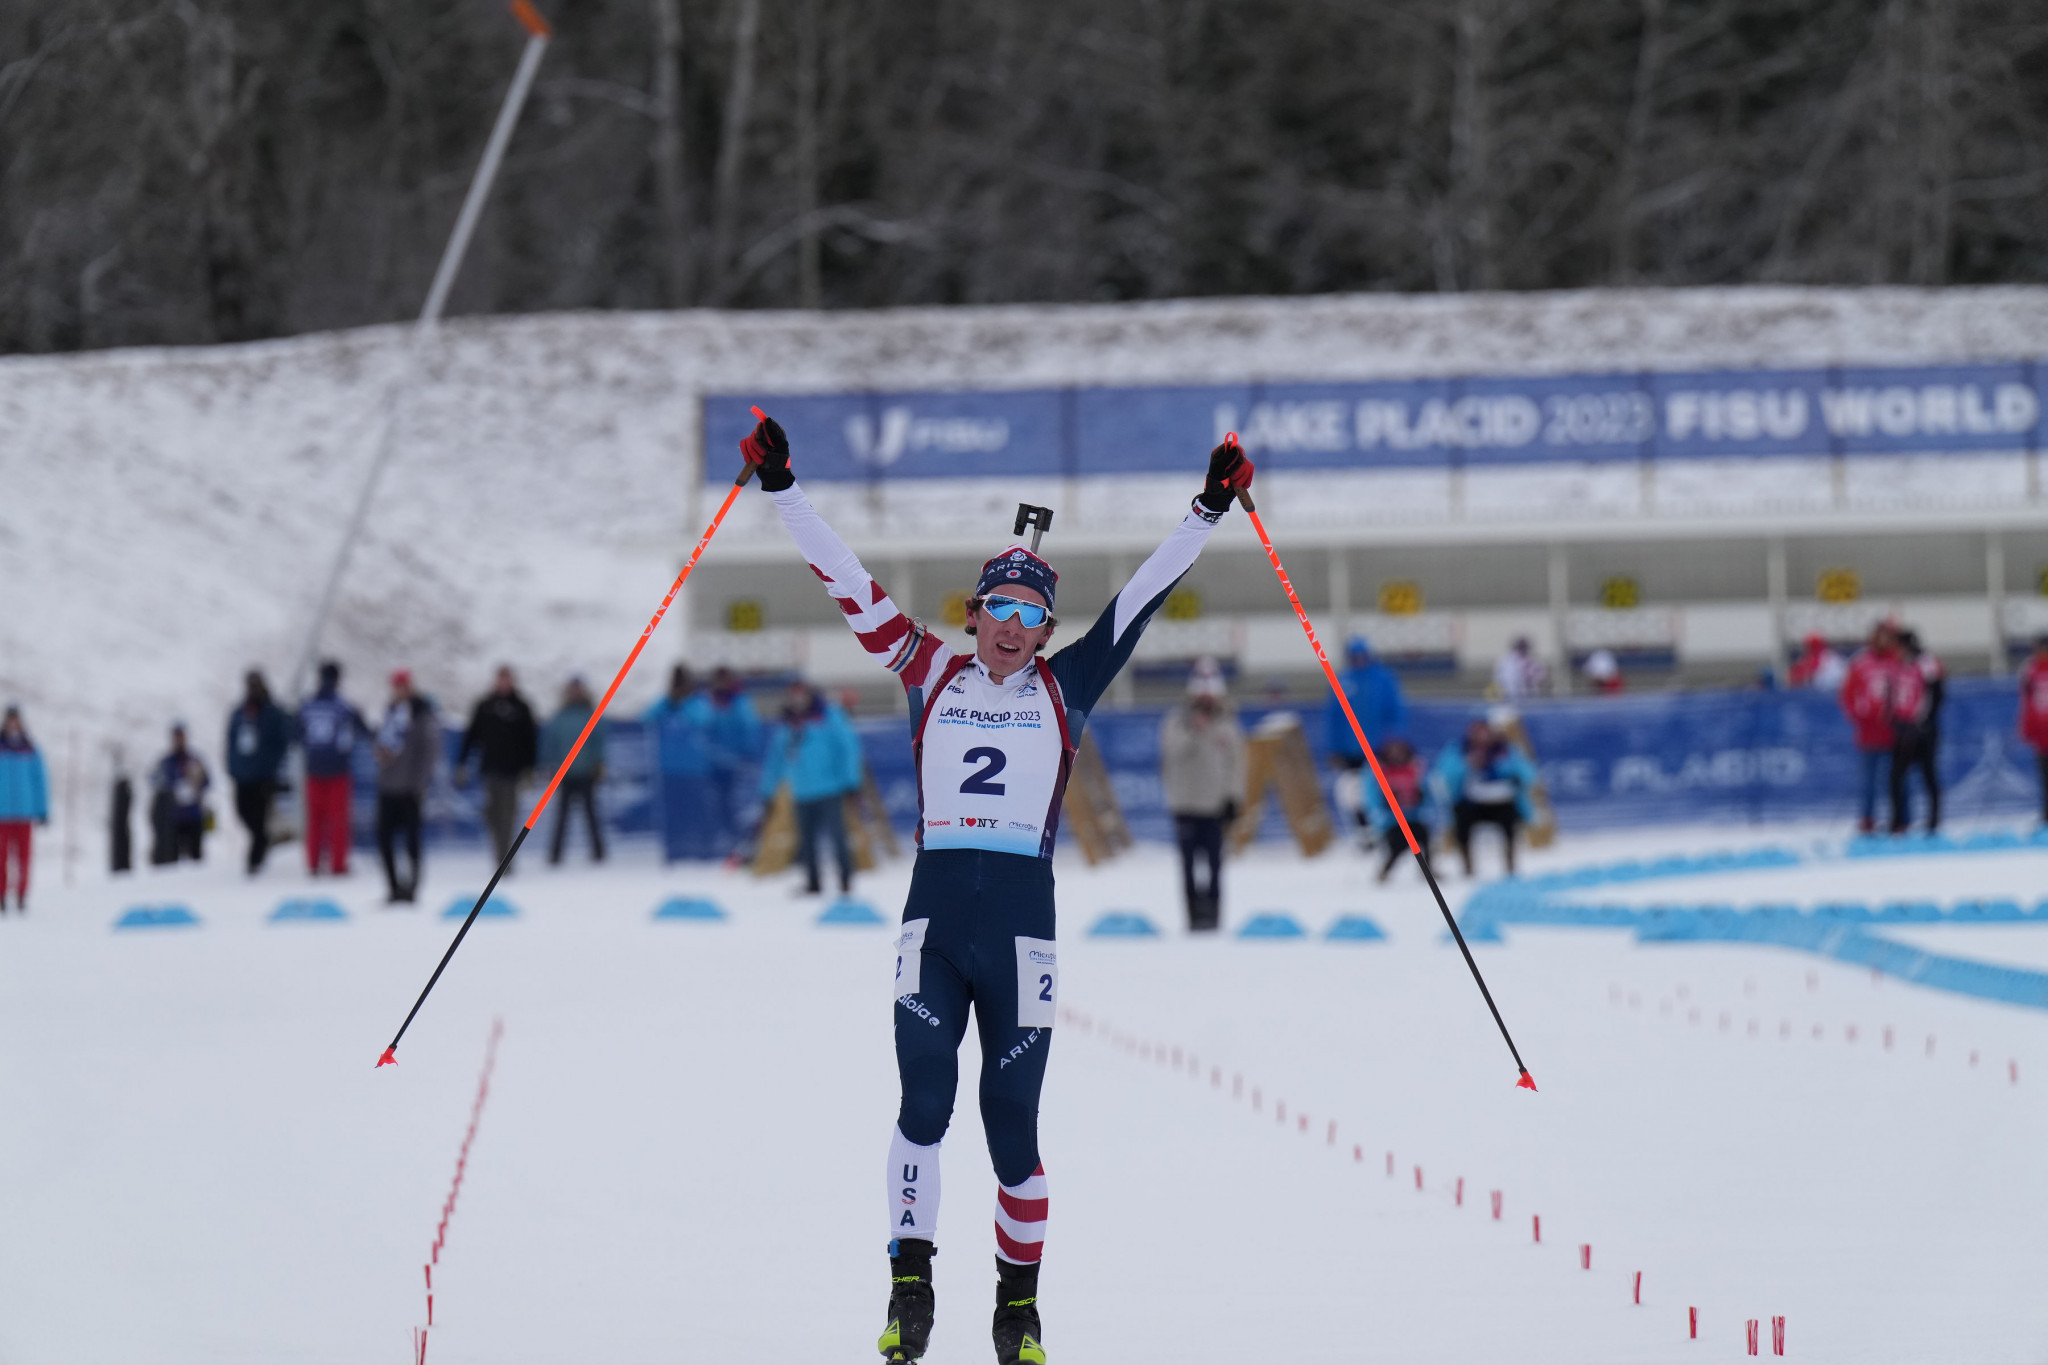 Bjorn Westervelt of the United States received a roar of approval from the crowd as he took the men's 12.5km biathlon pursuit title ©FISU